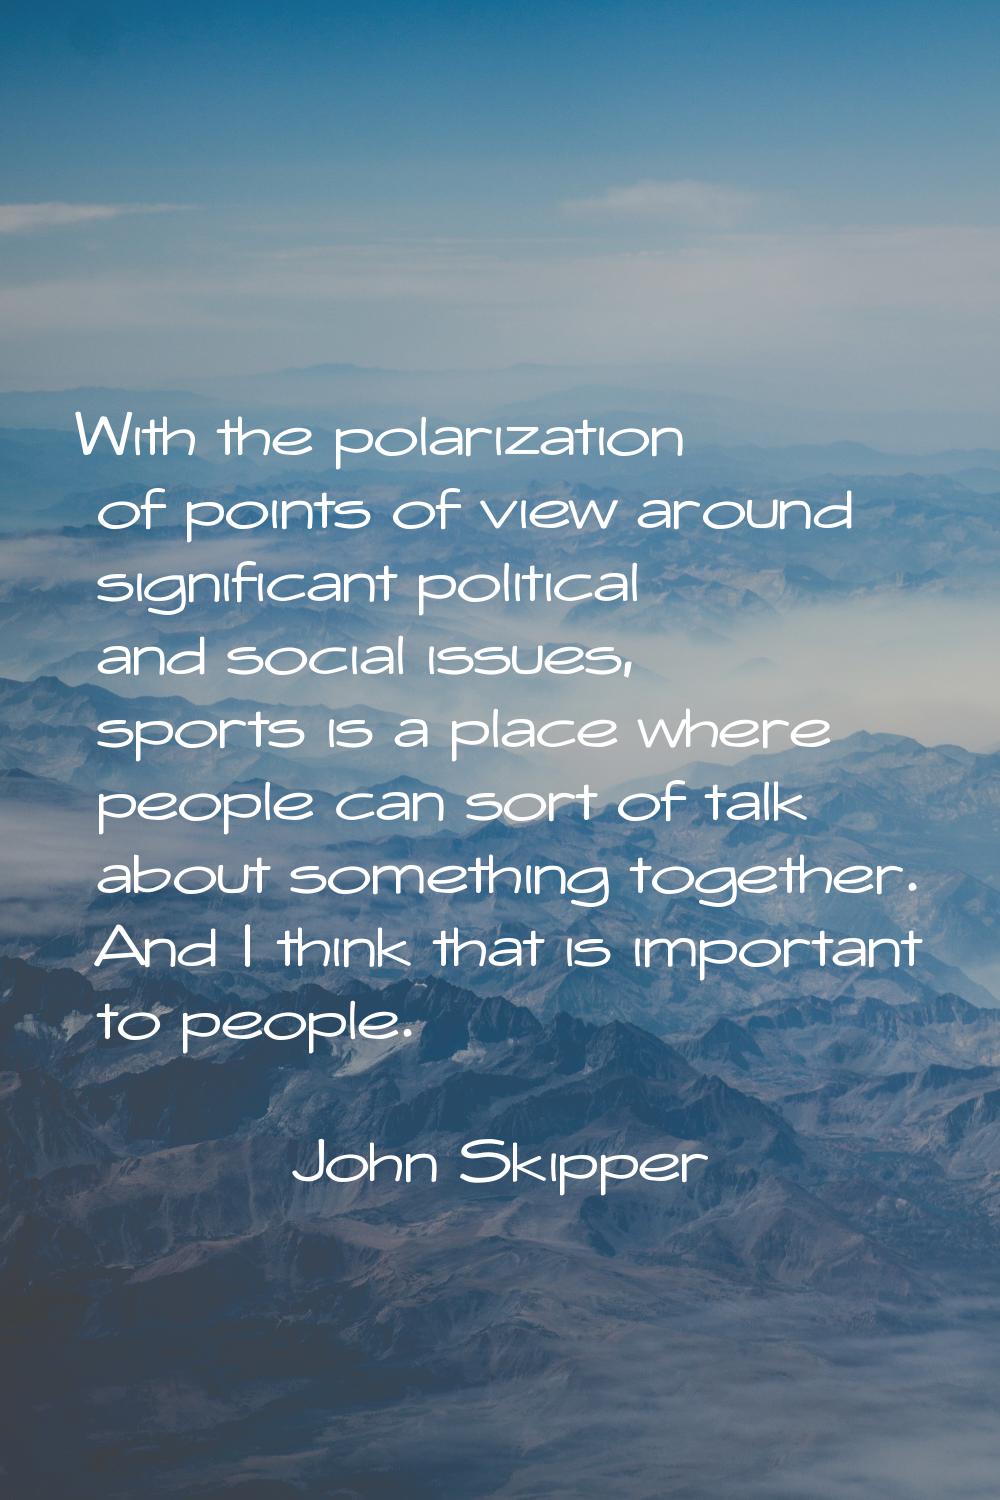 With the polarization of points of view around significant political and social issues, sports is a